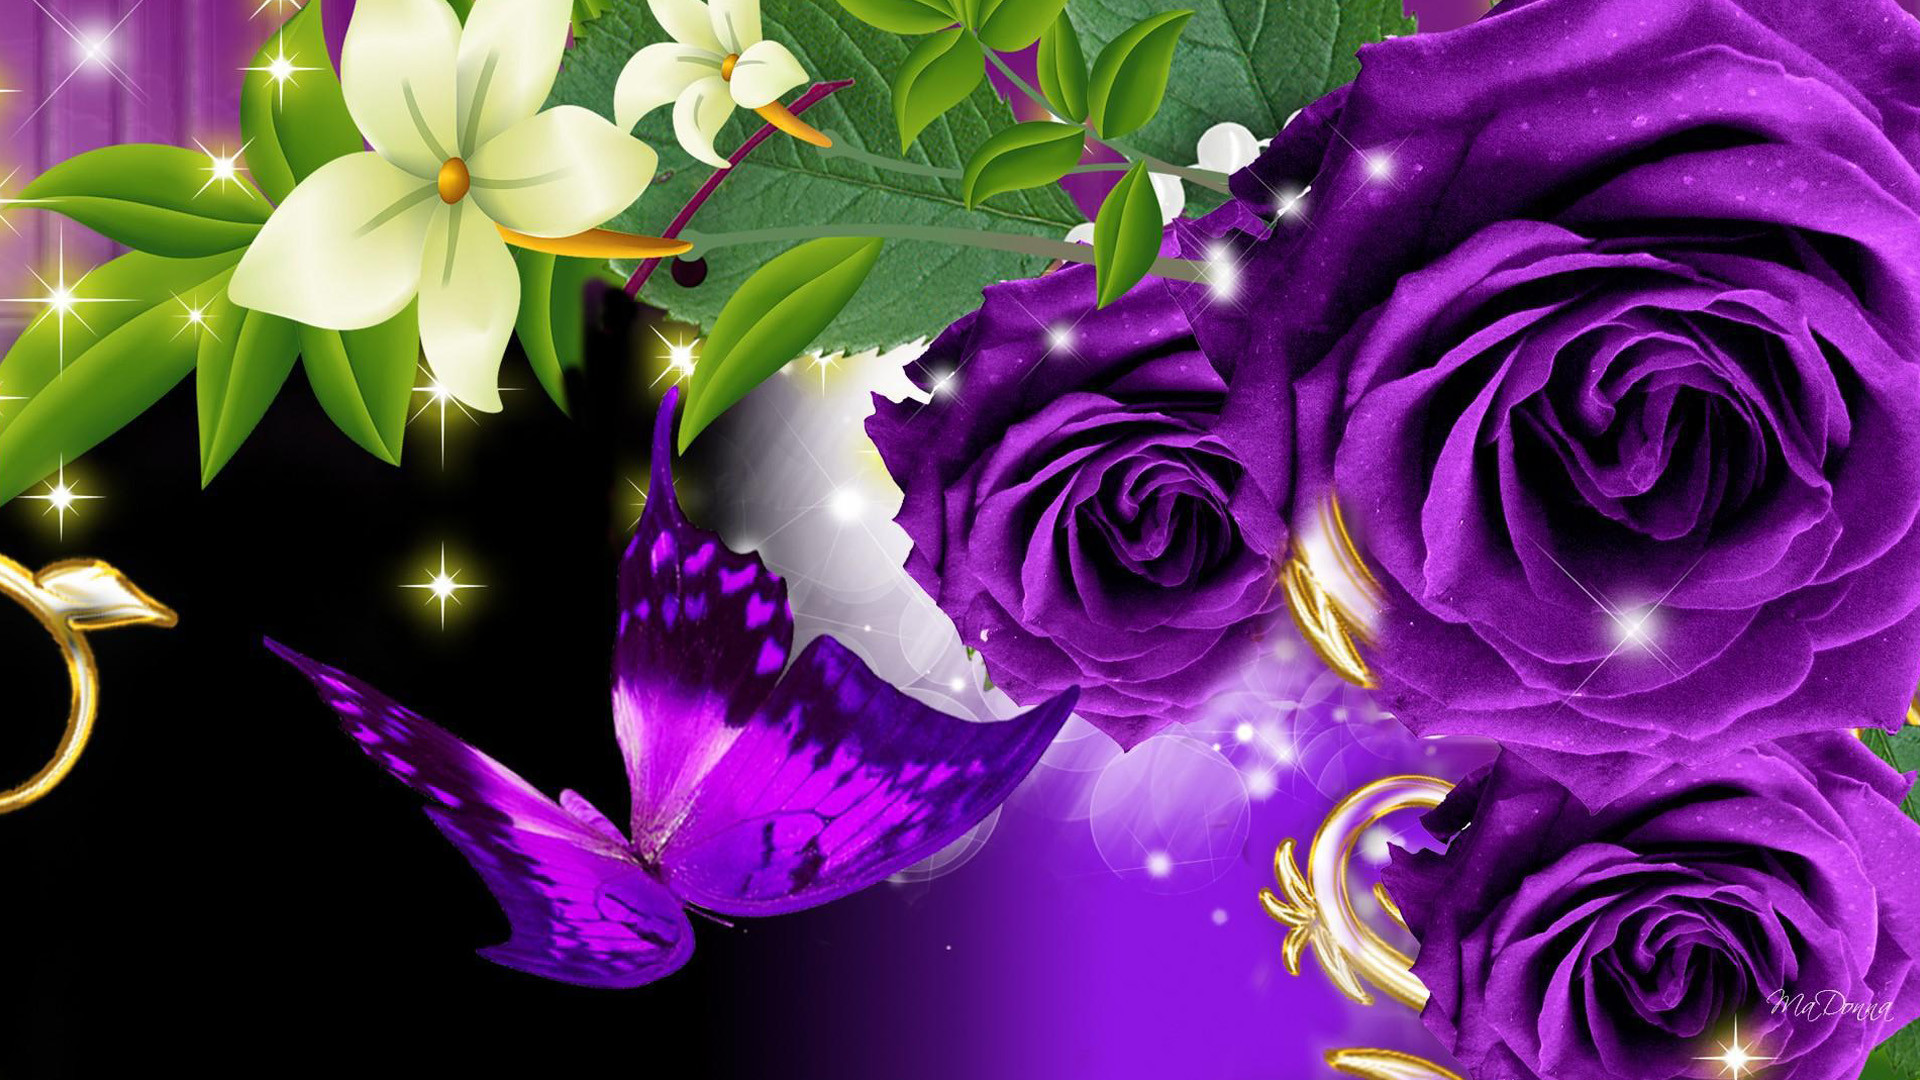 1920x1080 Top 10 Beautiful Flowers Live Wallpapers Apps for Android